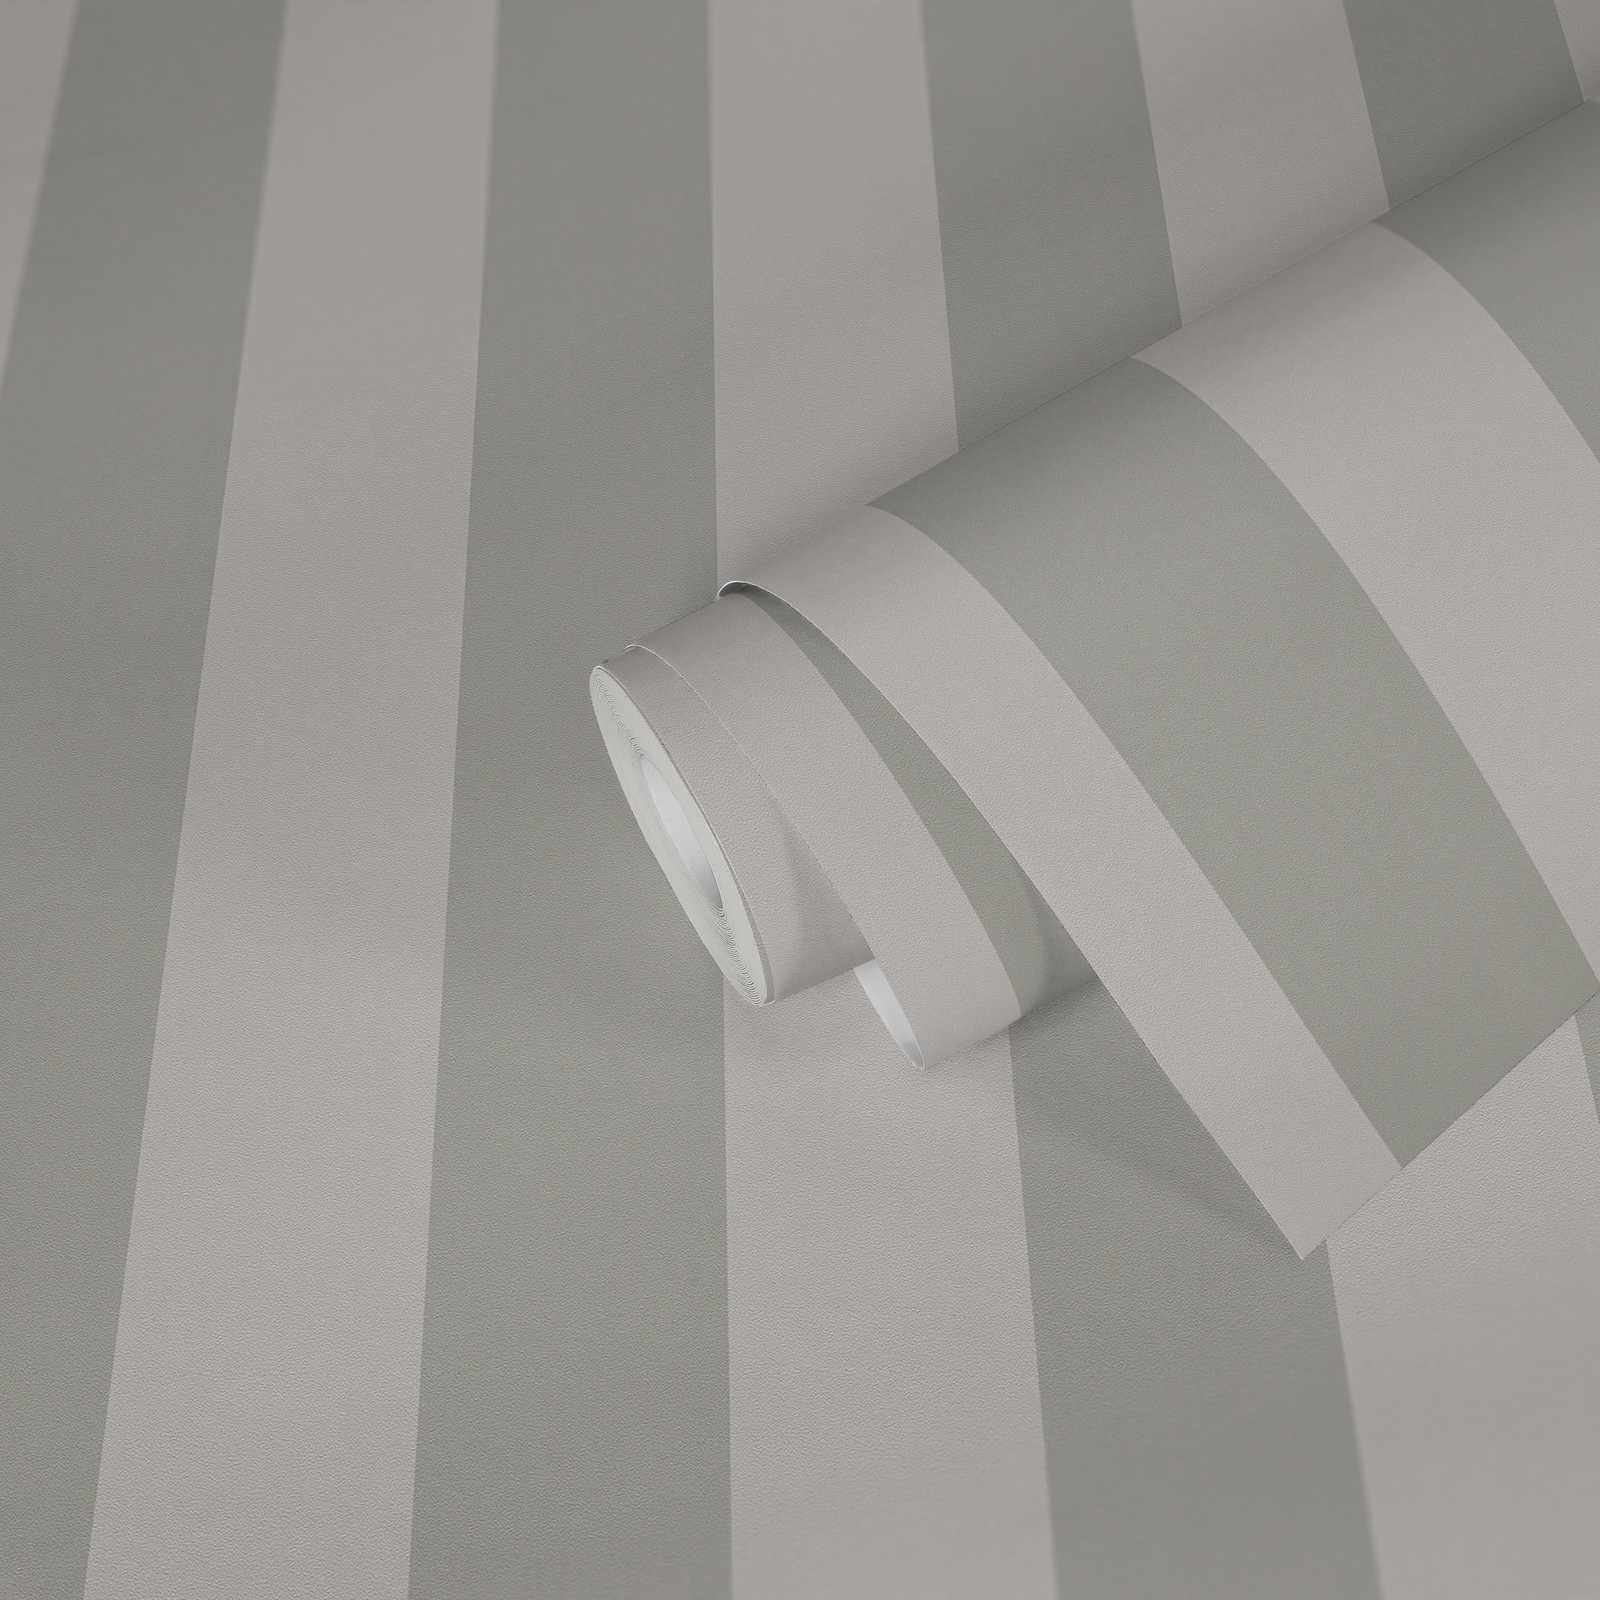             Non-woven wallpaper with block stripes and light structure - grey
        